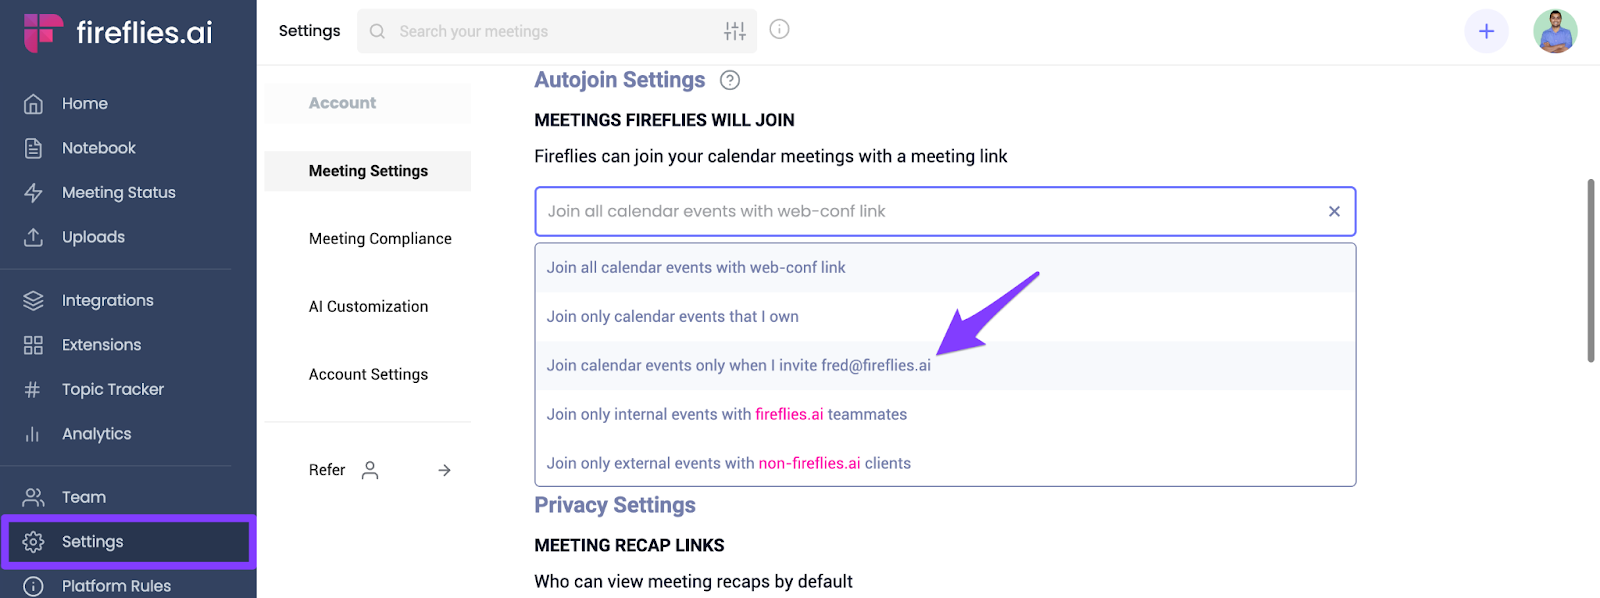 How to transcribe a meeting? auto configure Fireflies settings